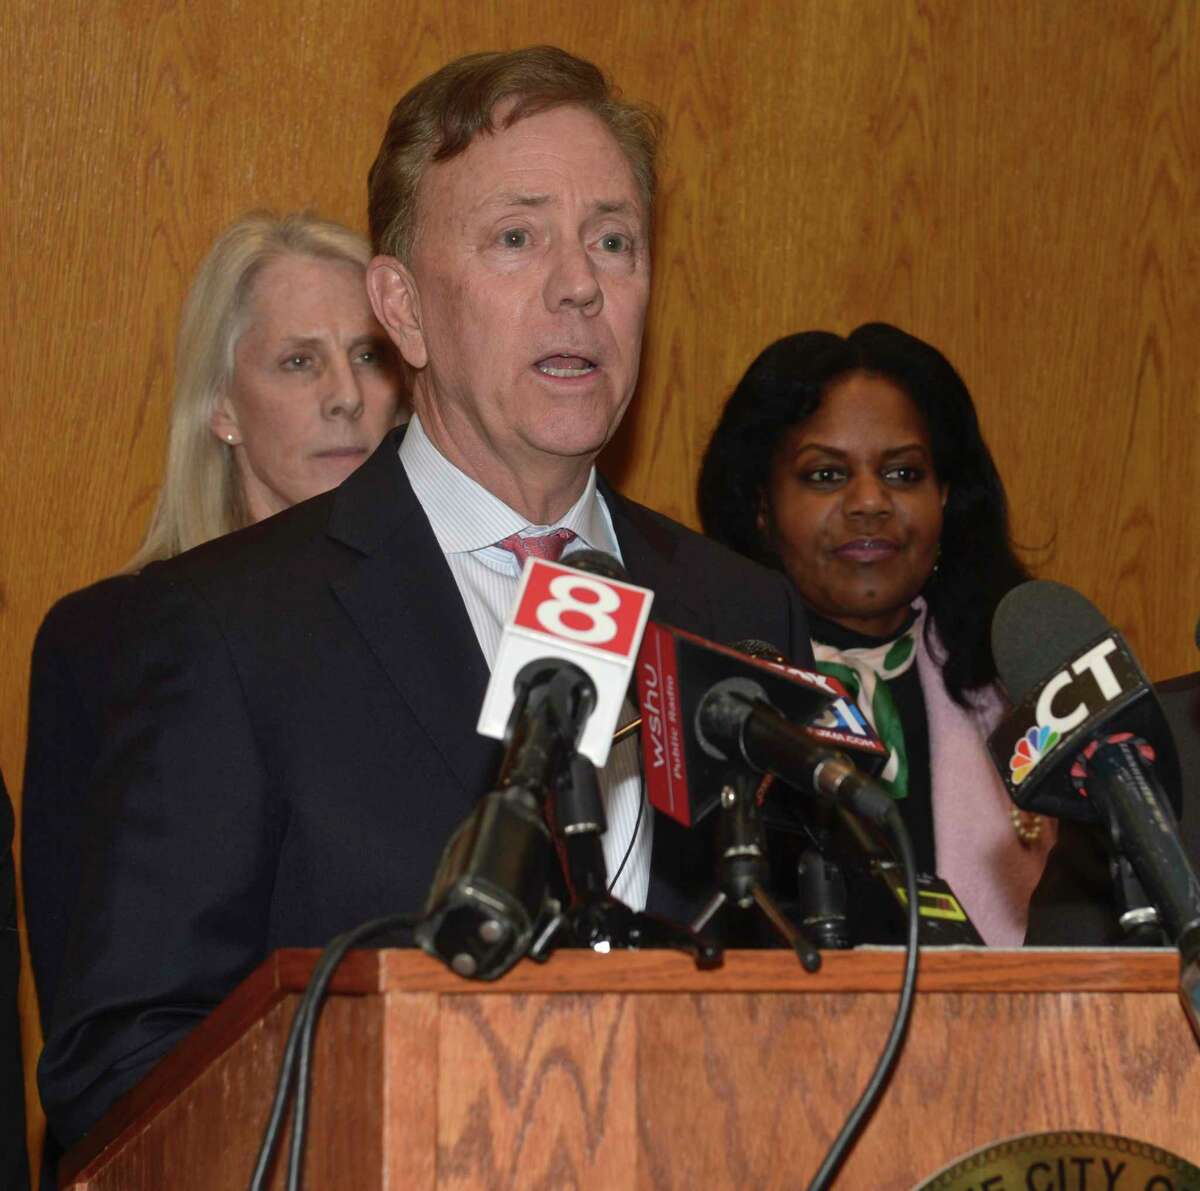 Governor Ned Lamont when he announced details of the first coronavirus case in Connecticut on March 6, 2020 at City Hall in Danbury.